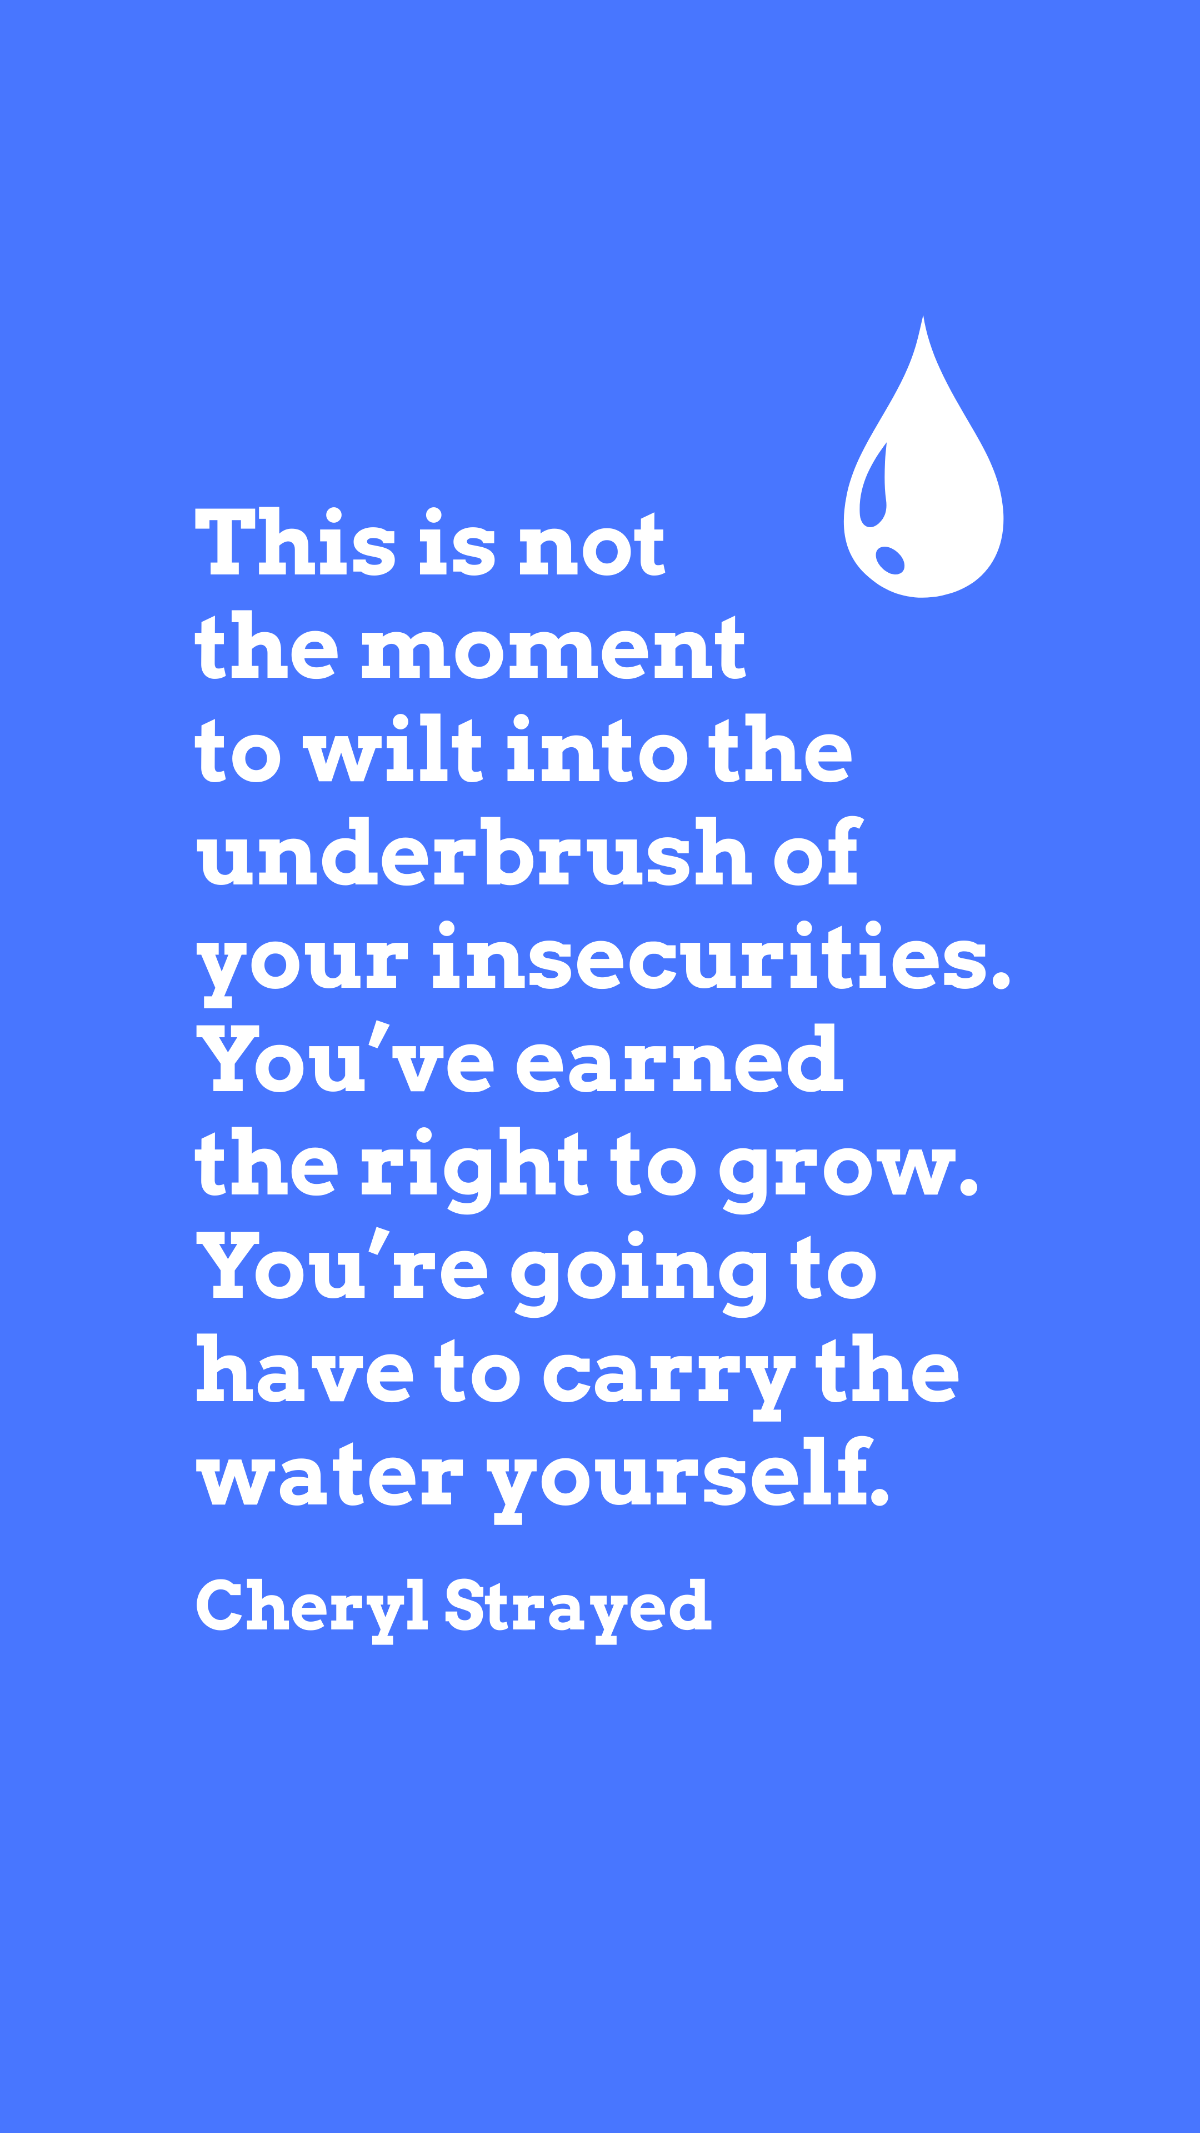 Free Cheryl Strayed - This is not the moment to wilt into the underbrush of your insecurities. You’ve earned the right to grow. You’re going to have to carry the water yourself. Template